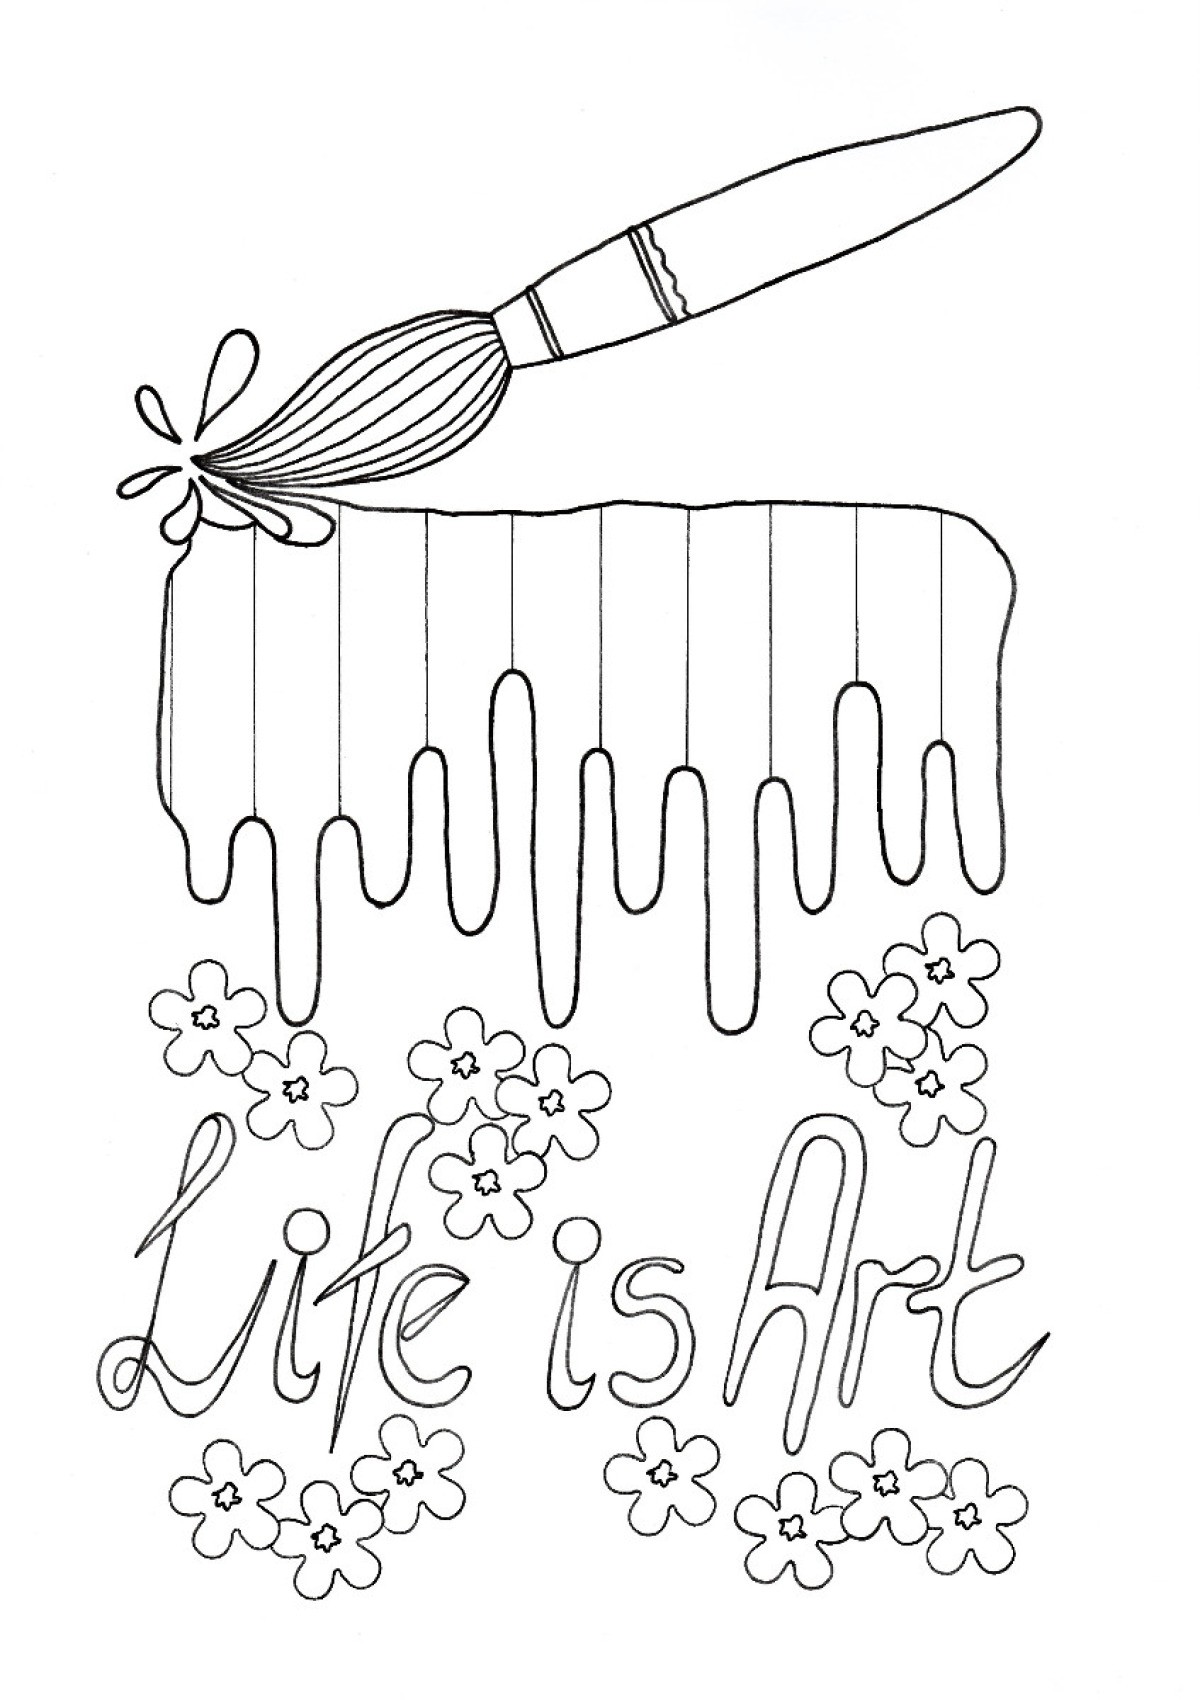 Download "Life Is Art" Kids' Coloring Page | ThriftyFun